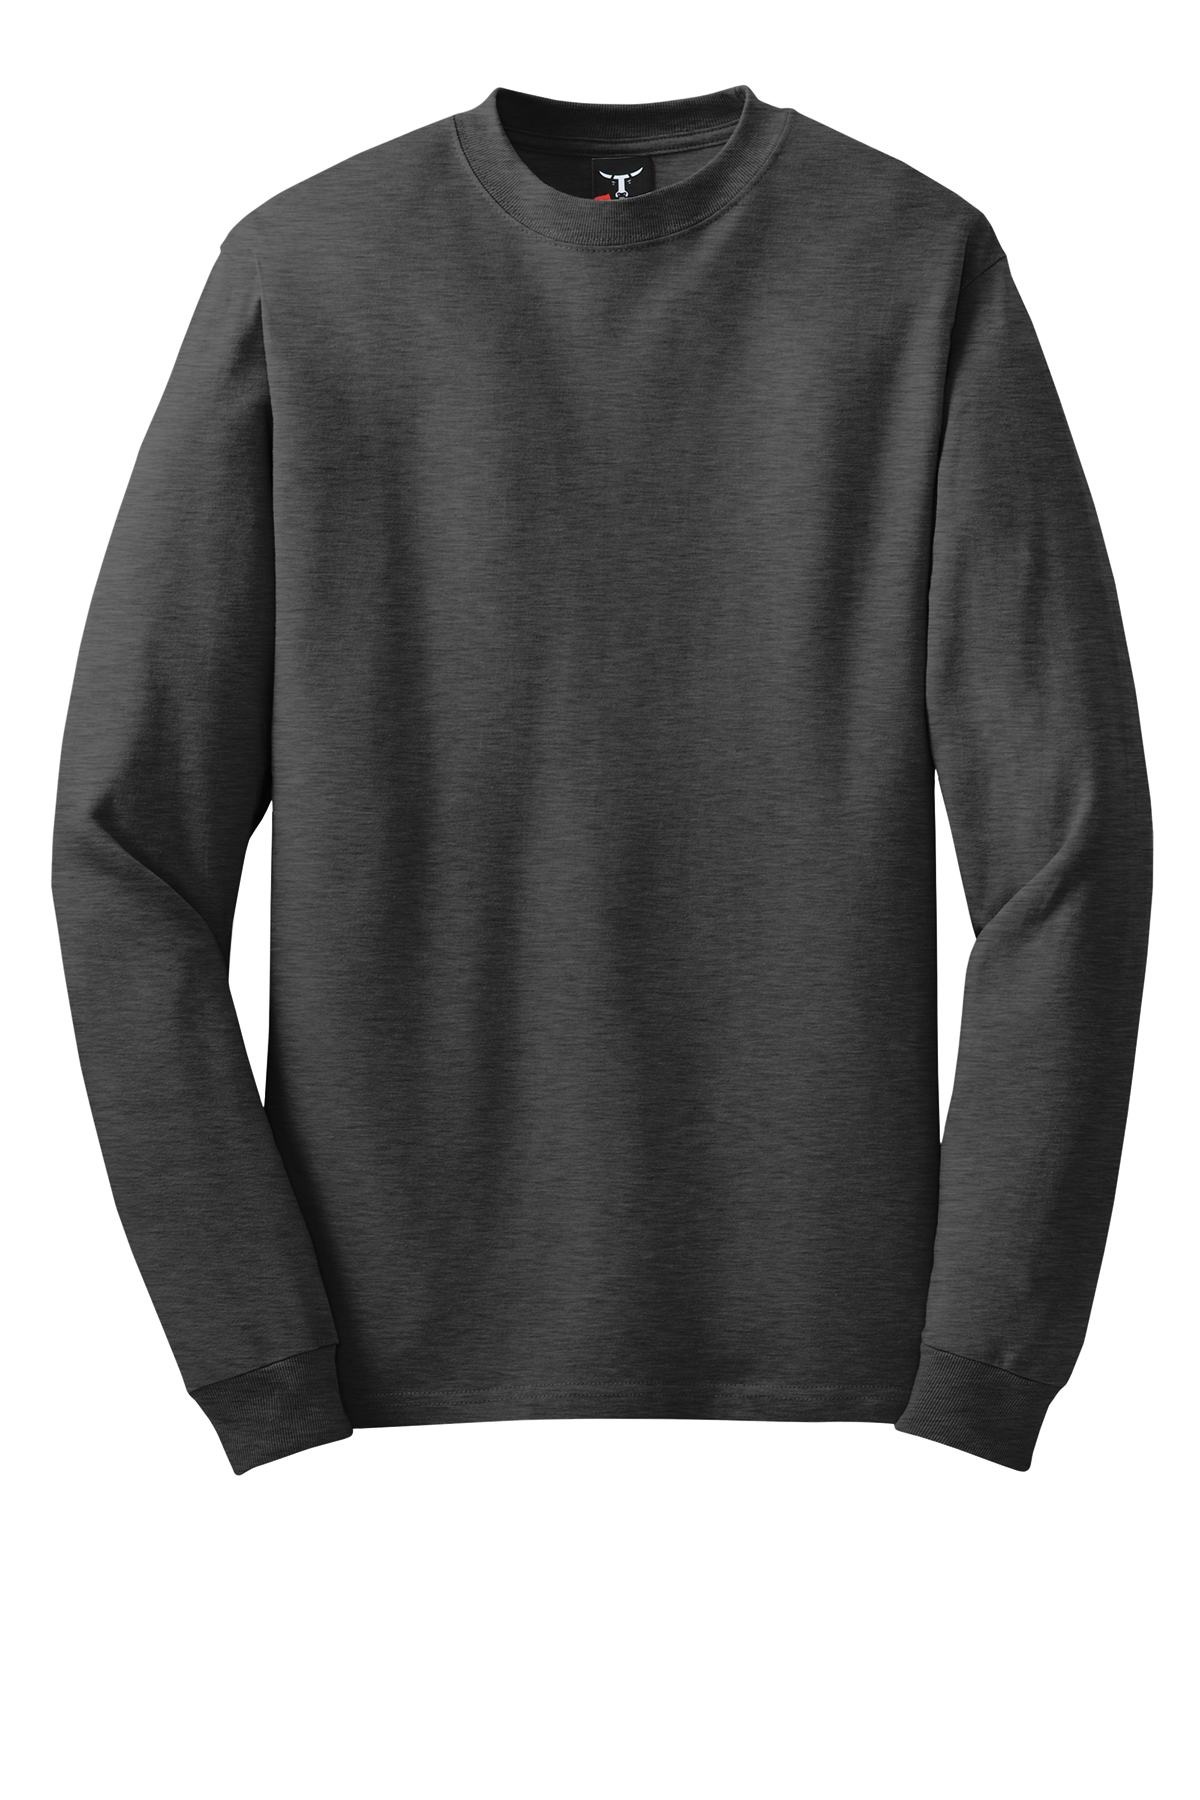 Hanes Beefy-T - 100% Cotton Long Sleeve T-Shirt | Product | SanMar